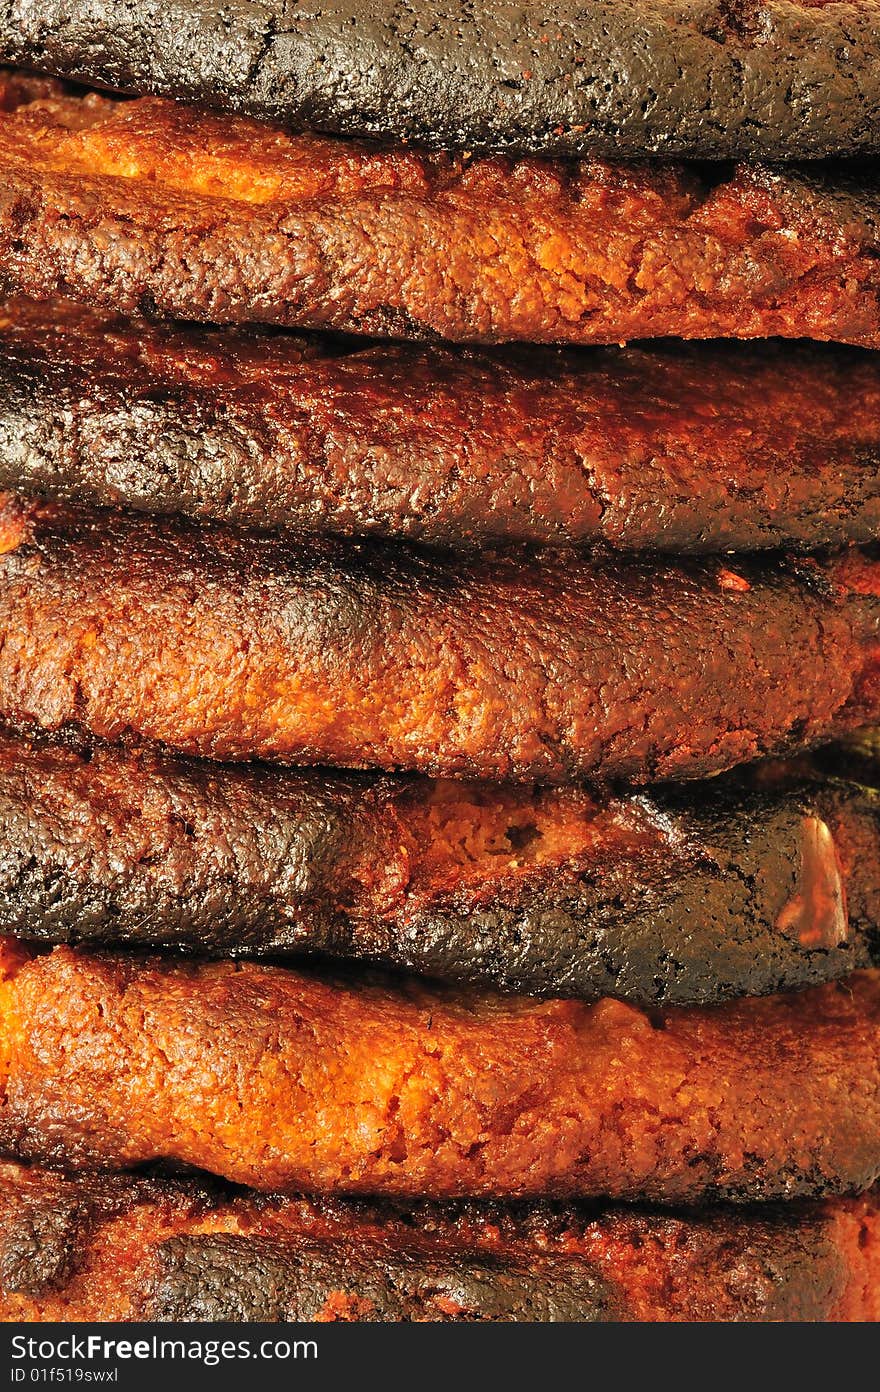 Macro image of a pile of burned biscuits.